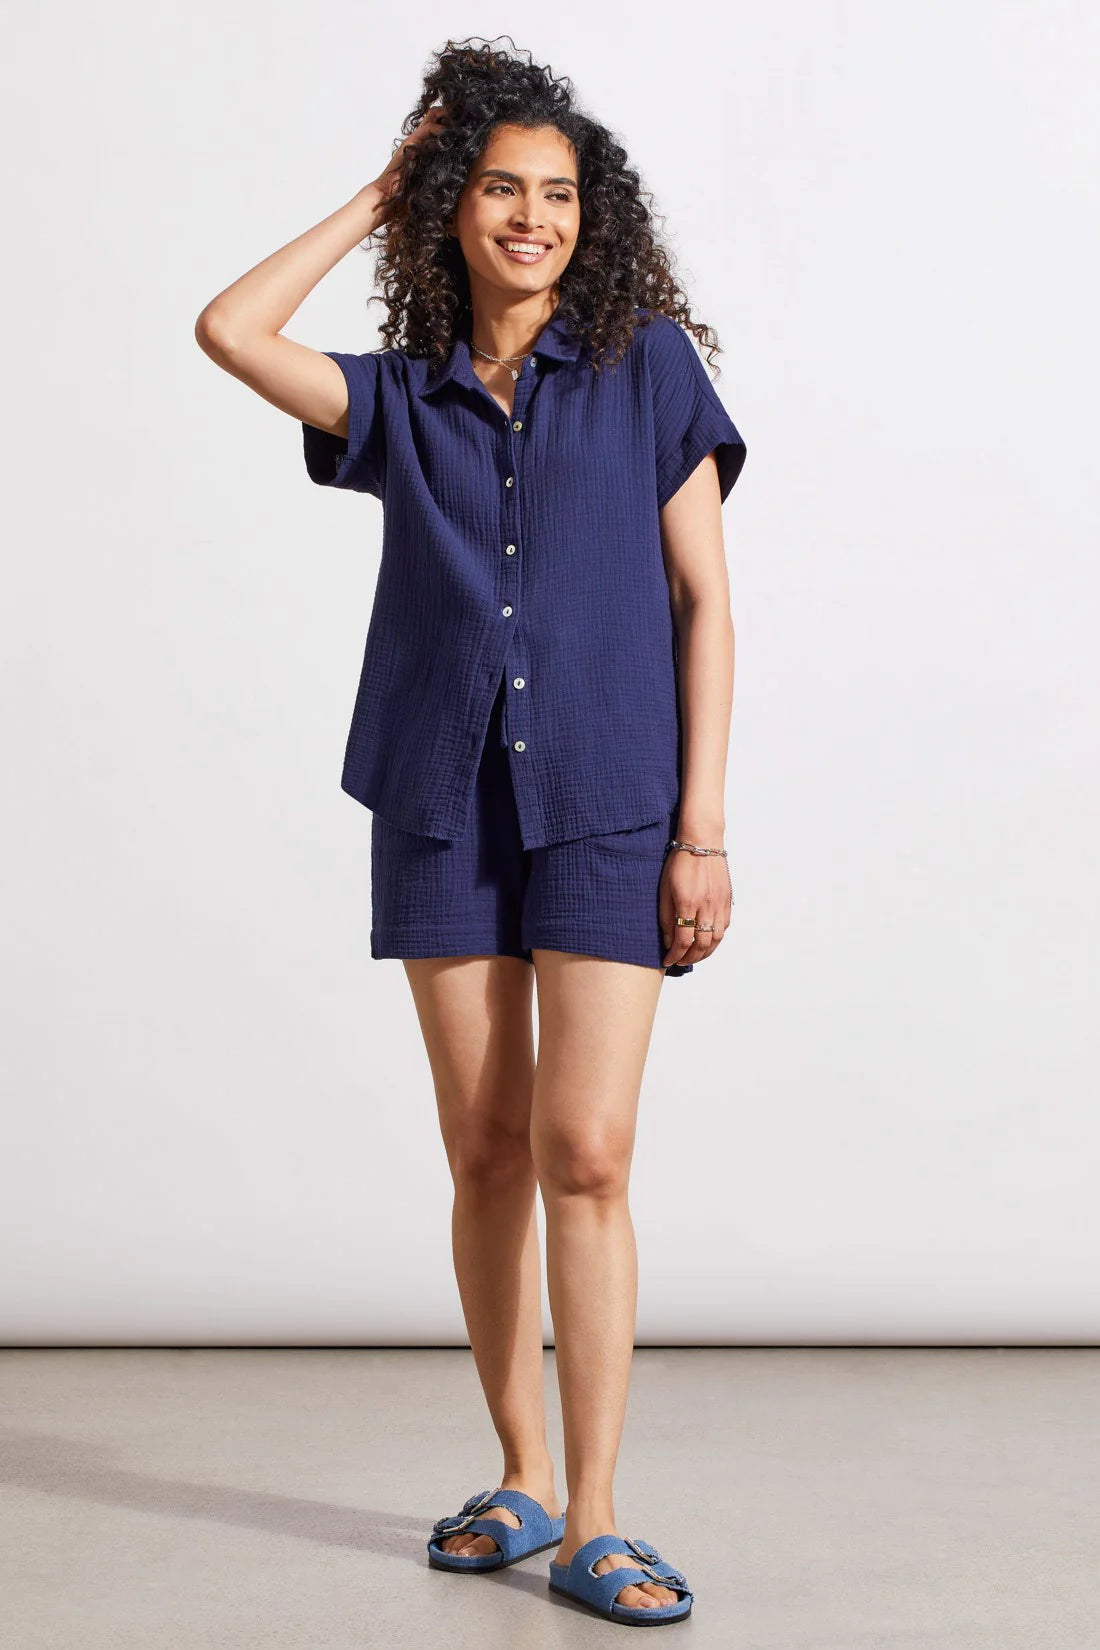 Rocking a classic button-up front, collared neckline, and short sleeves, this shirt brings refined style to warm days. We love the airy dolman design, rolled cuffs, raw-edge hem, and crinkled gauze cotton that stays lightweight from morning until night.